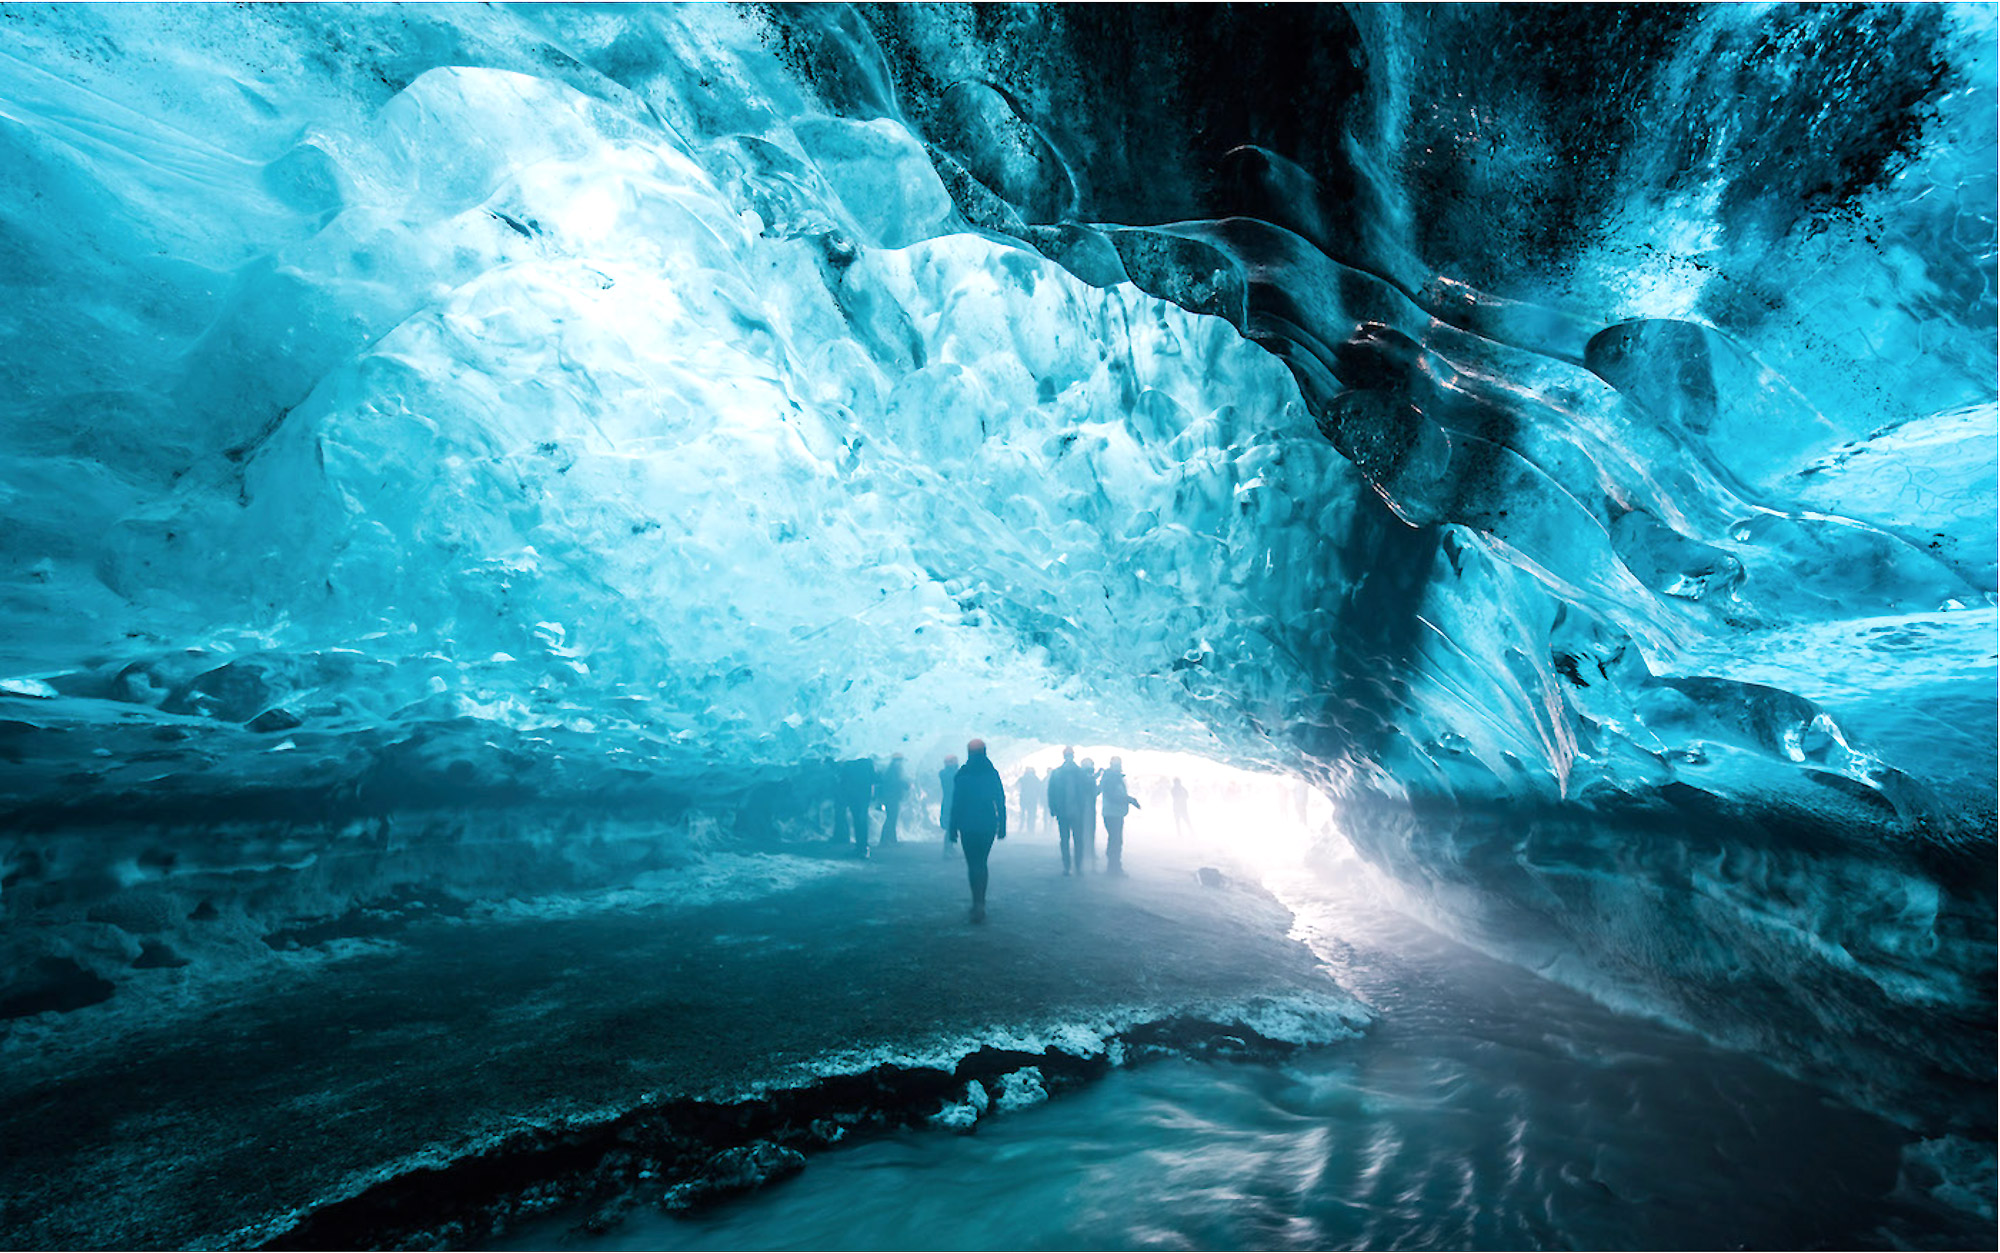 People walk through ice cave in blue light